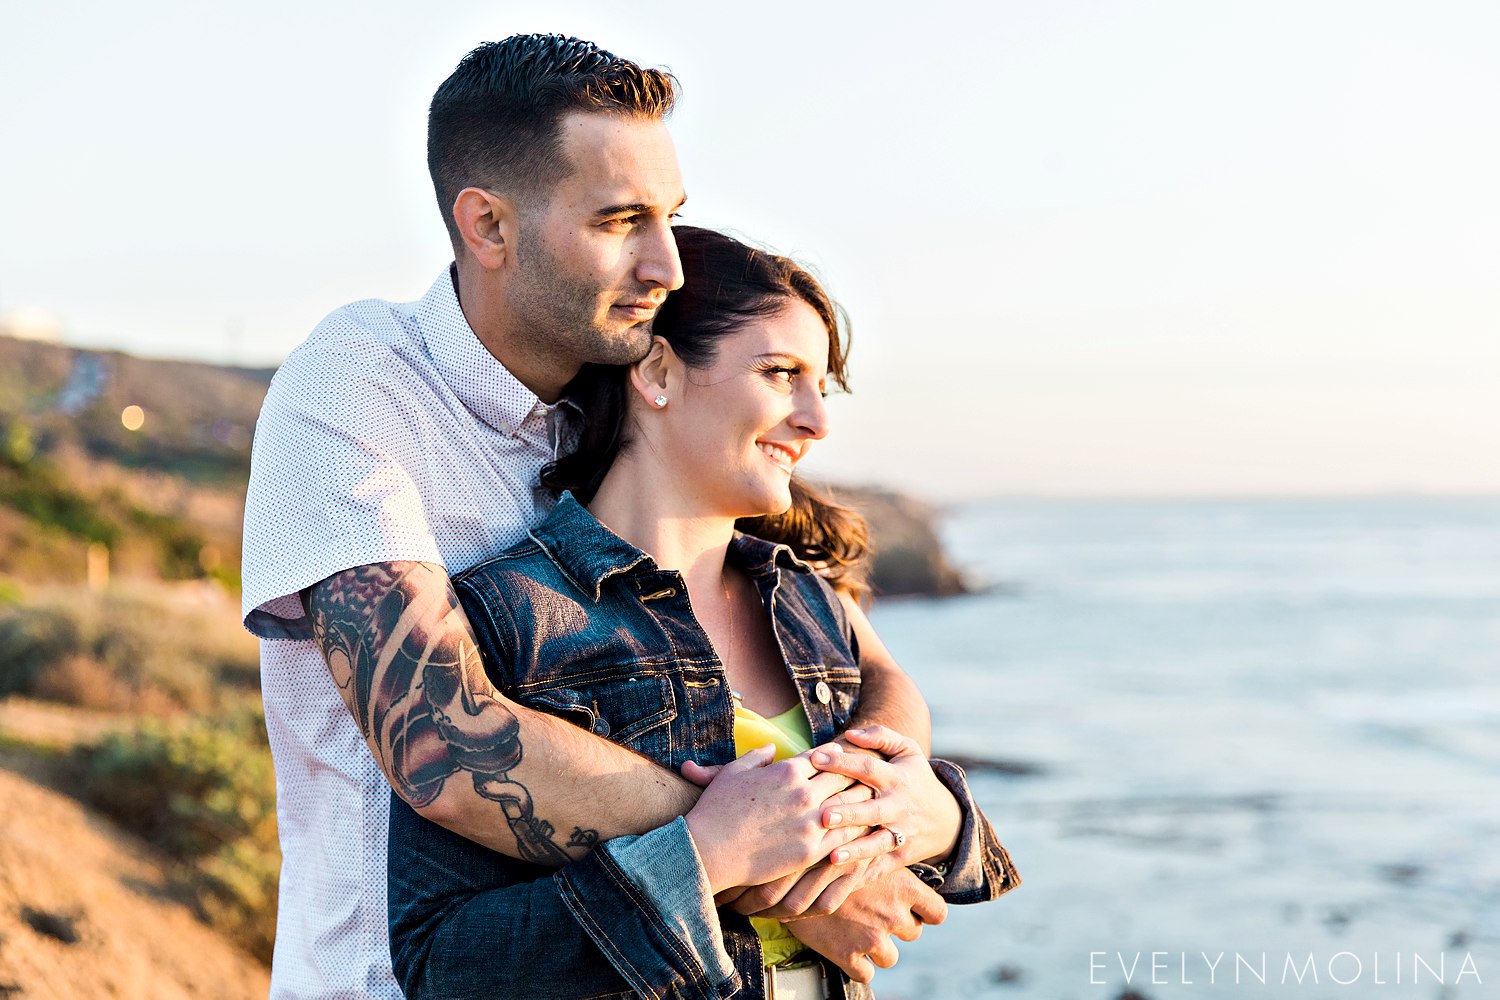 Sunset Cliffs Engagement Session - Carly and Alex - Evelyn Molina Photography_0015.jpg